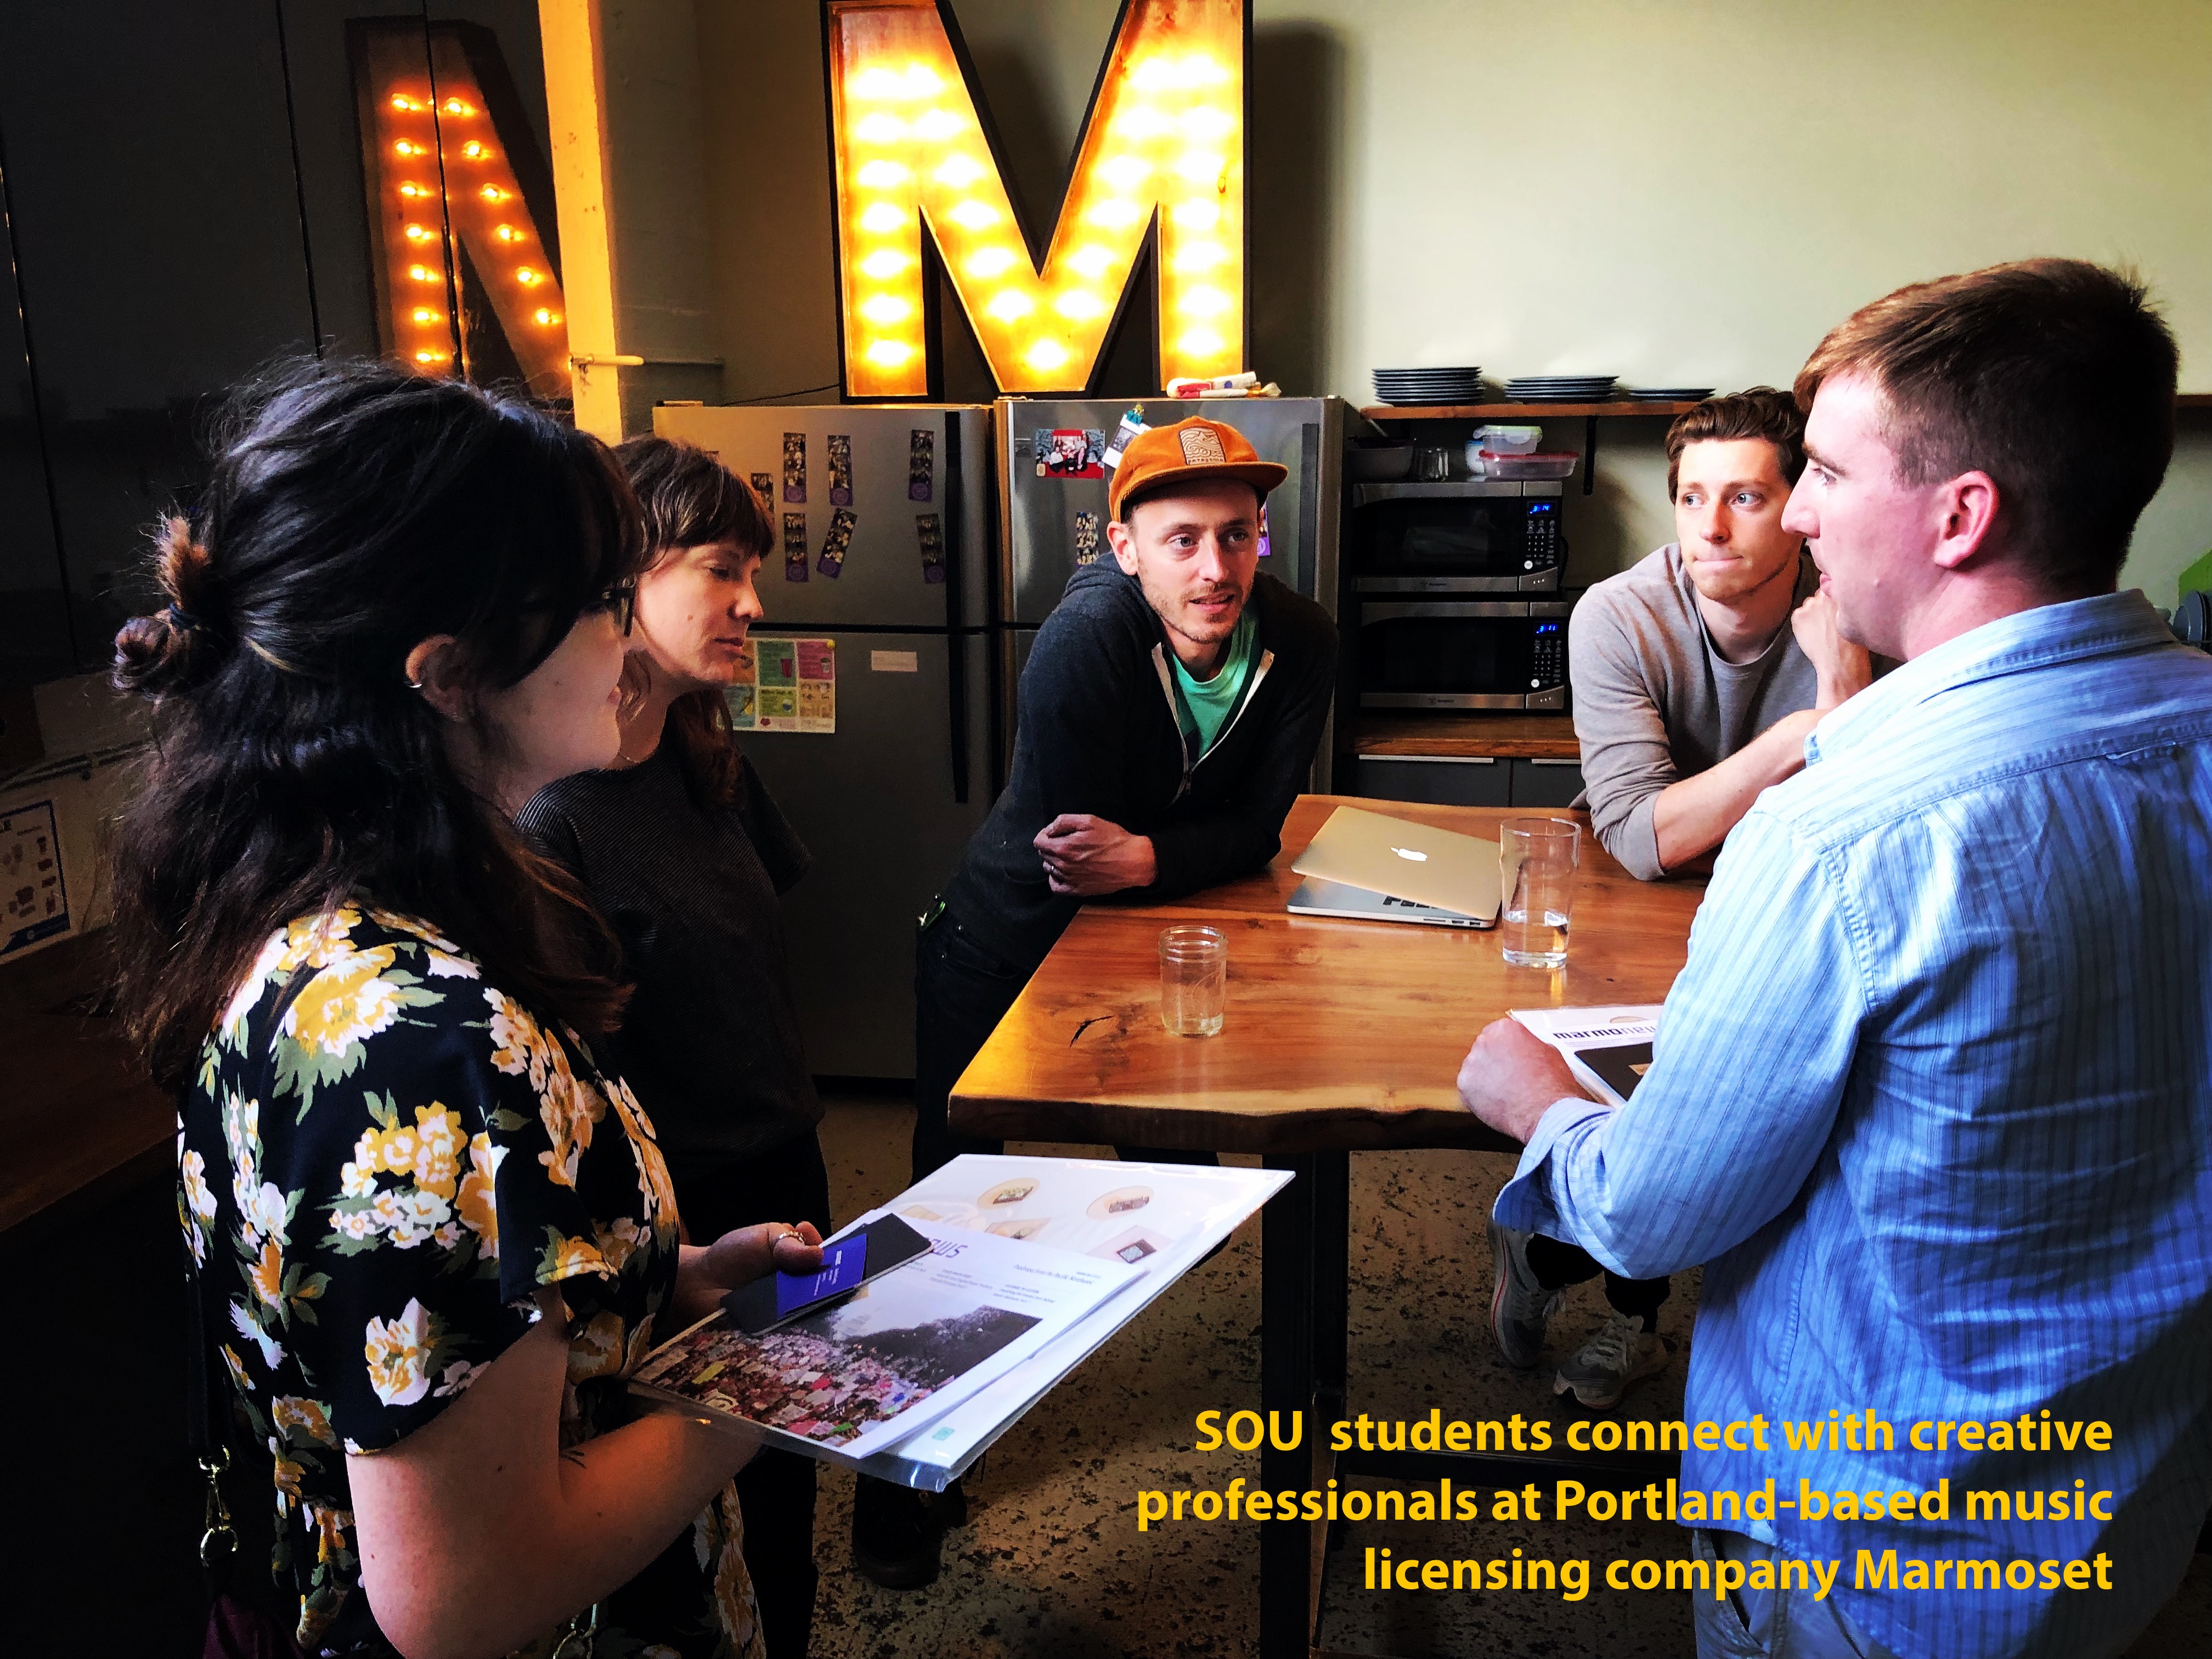 SOU students connect with creative professionals at Portland-based music licensing company Marmoset